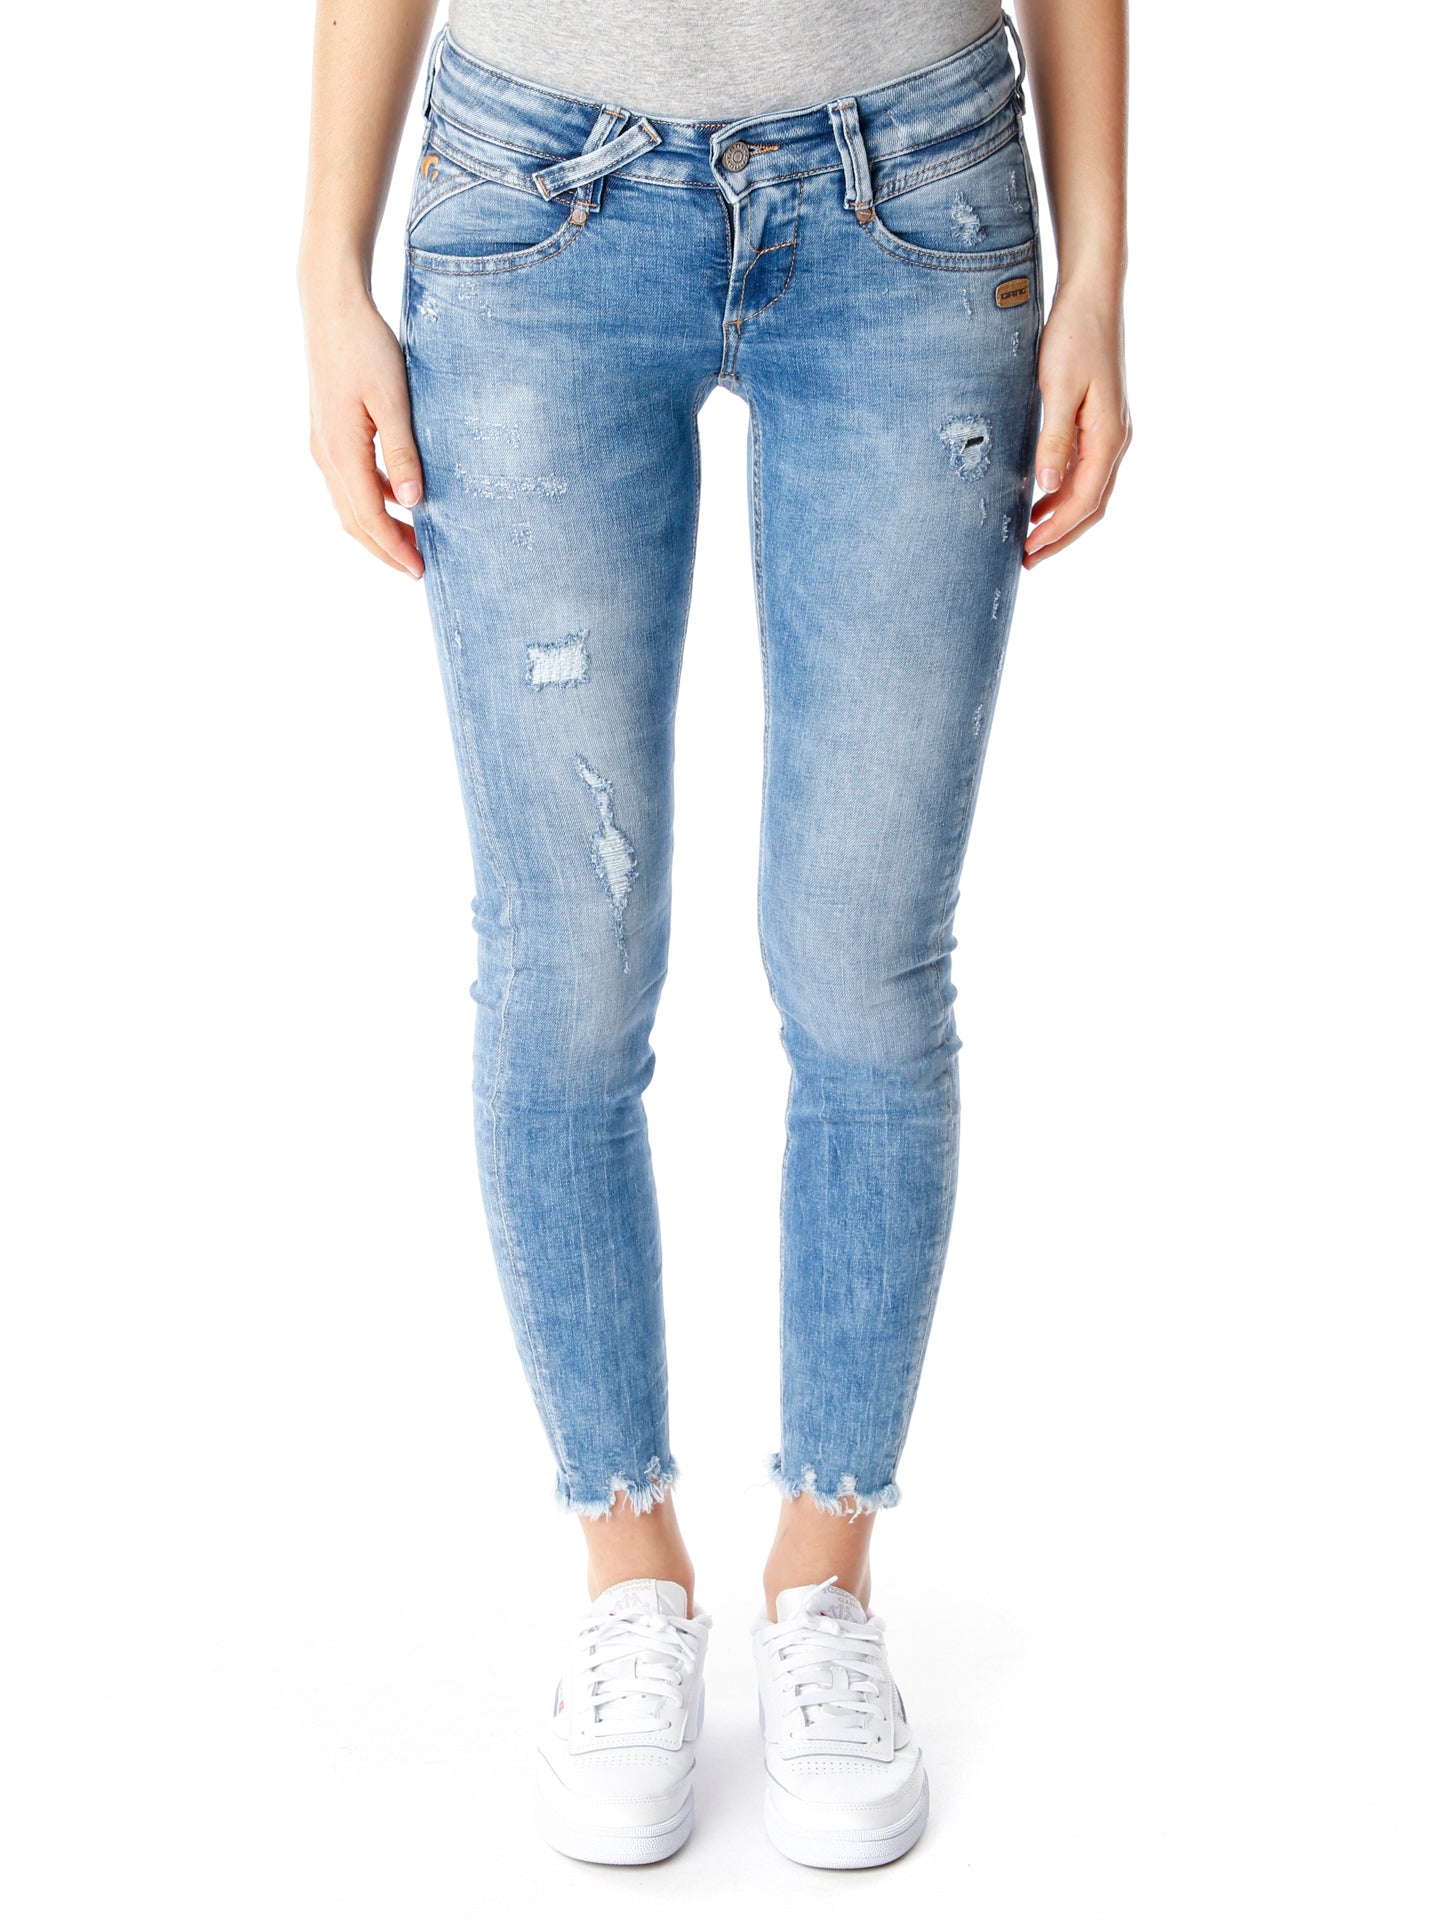 Cropped Jeans Gang Fit Waist Nena Low Skinny